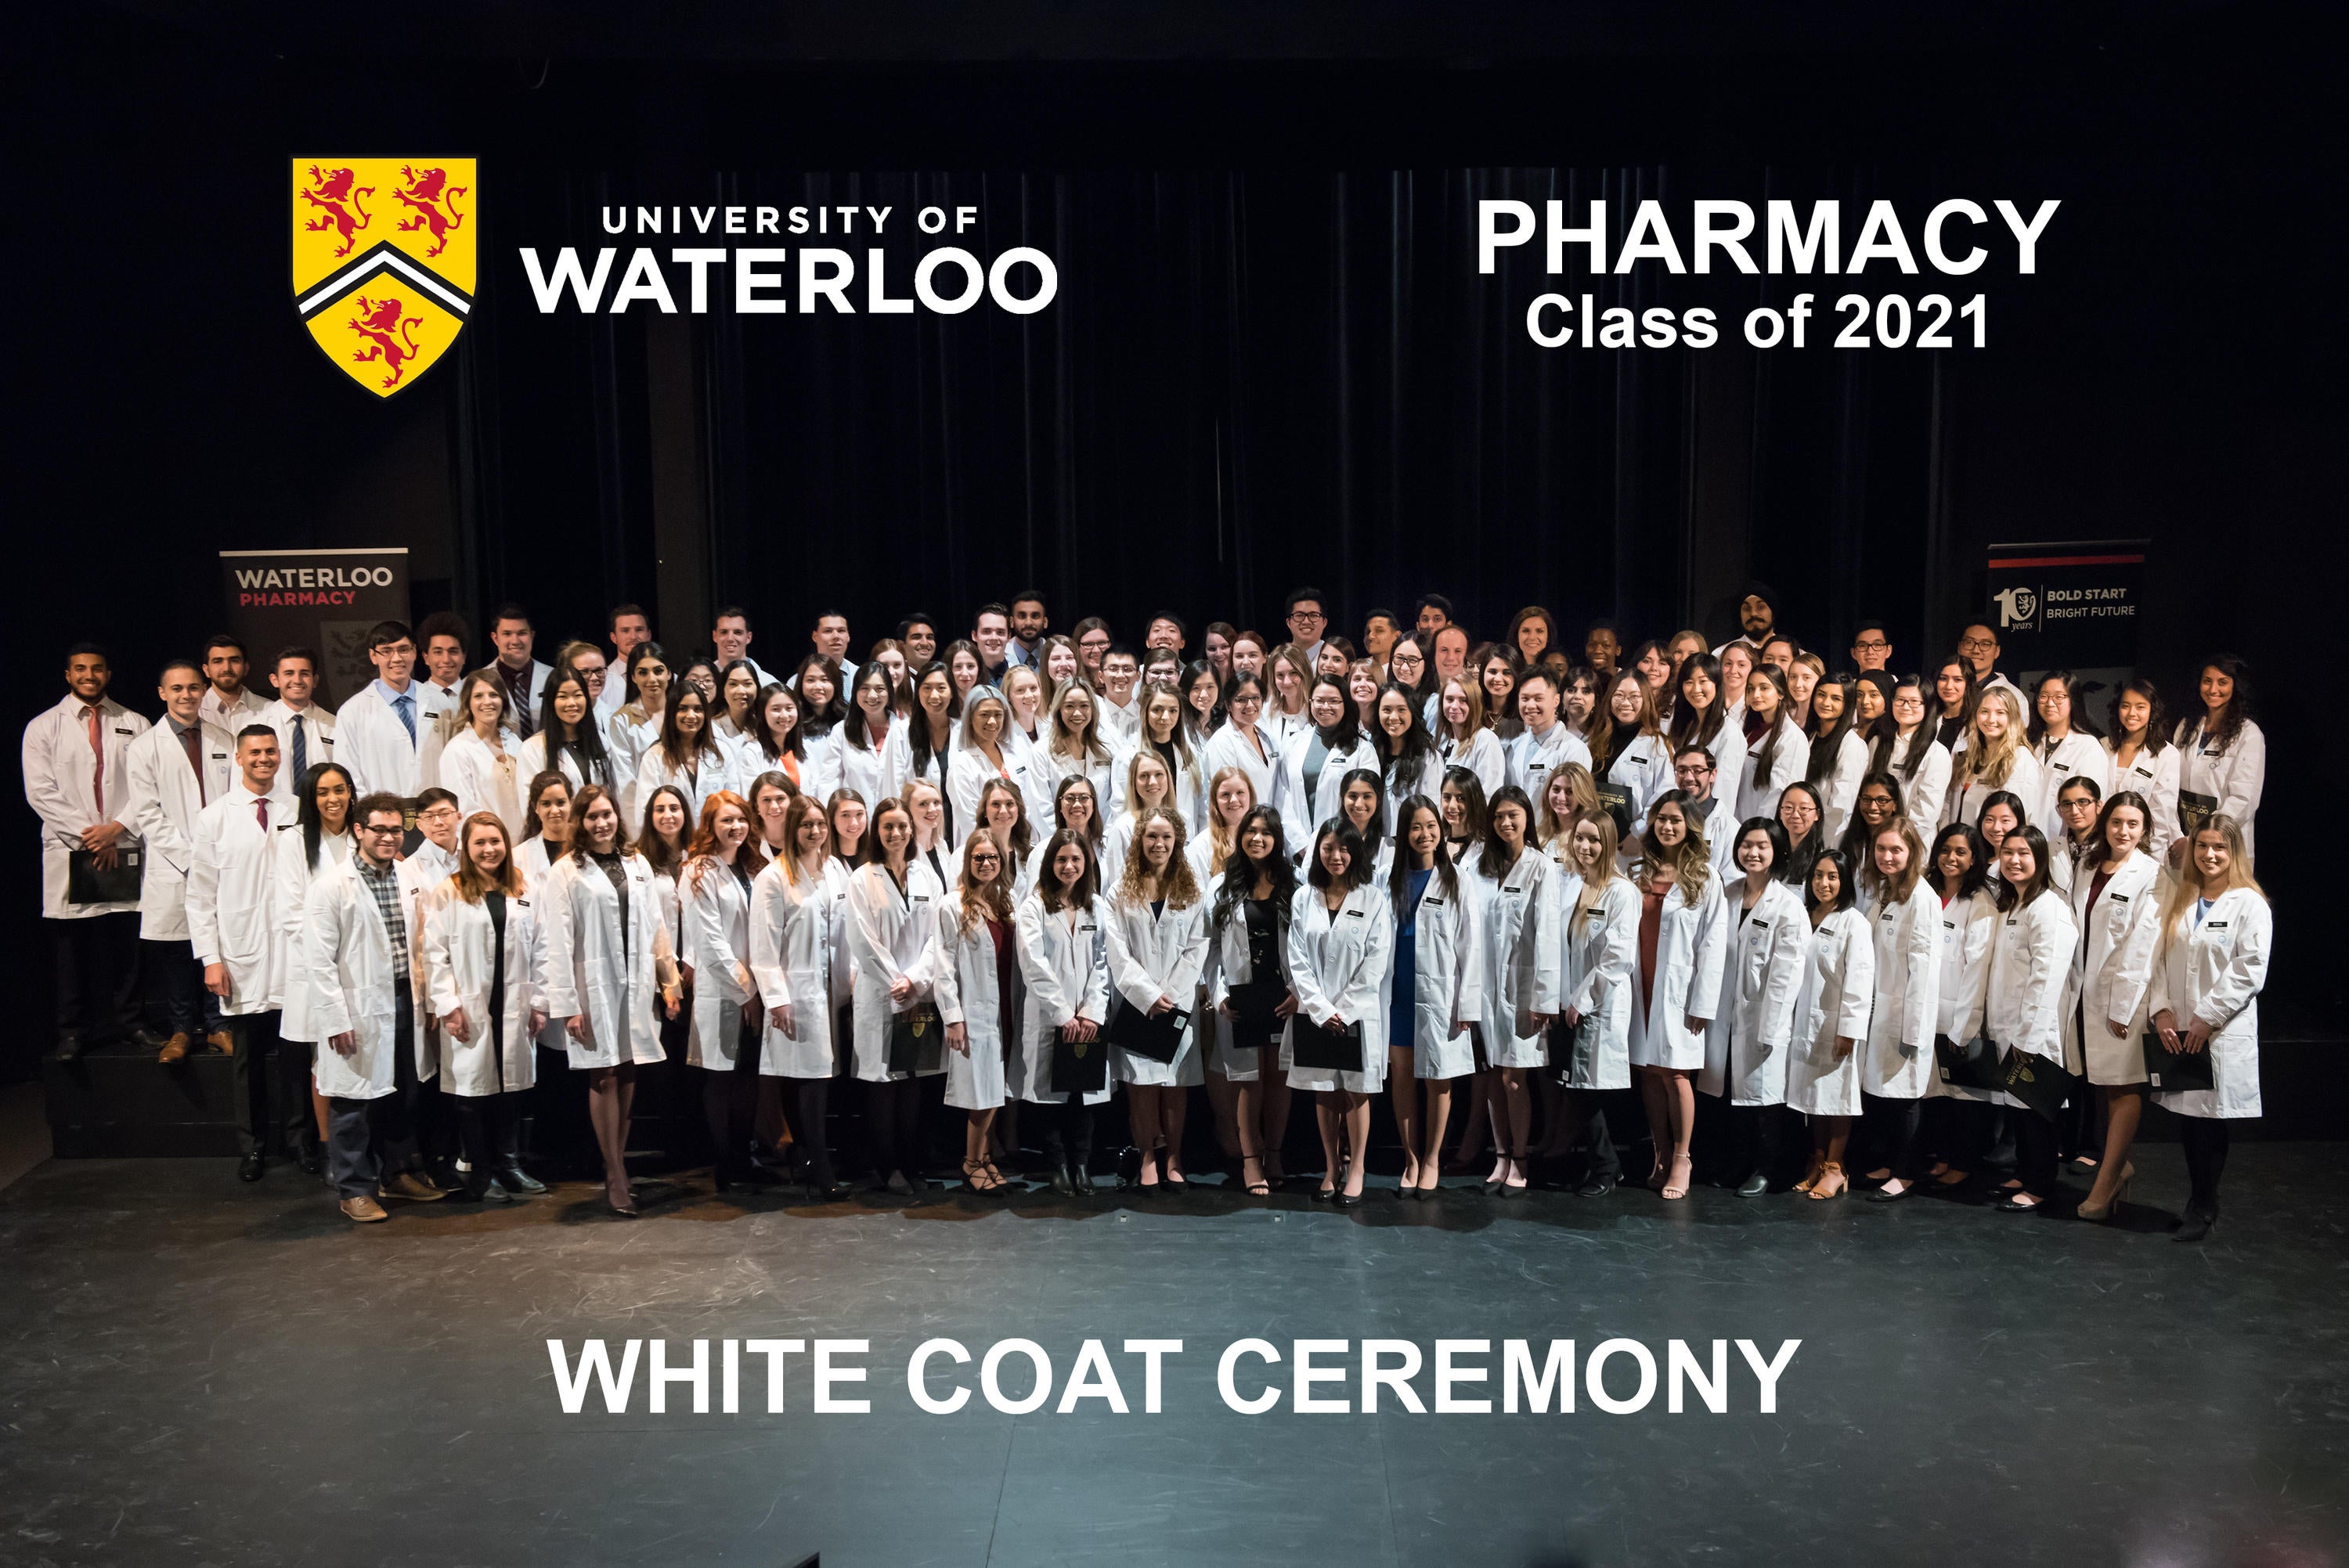 Rx2021s at their white coat ceremony in their new coats on stage